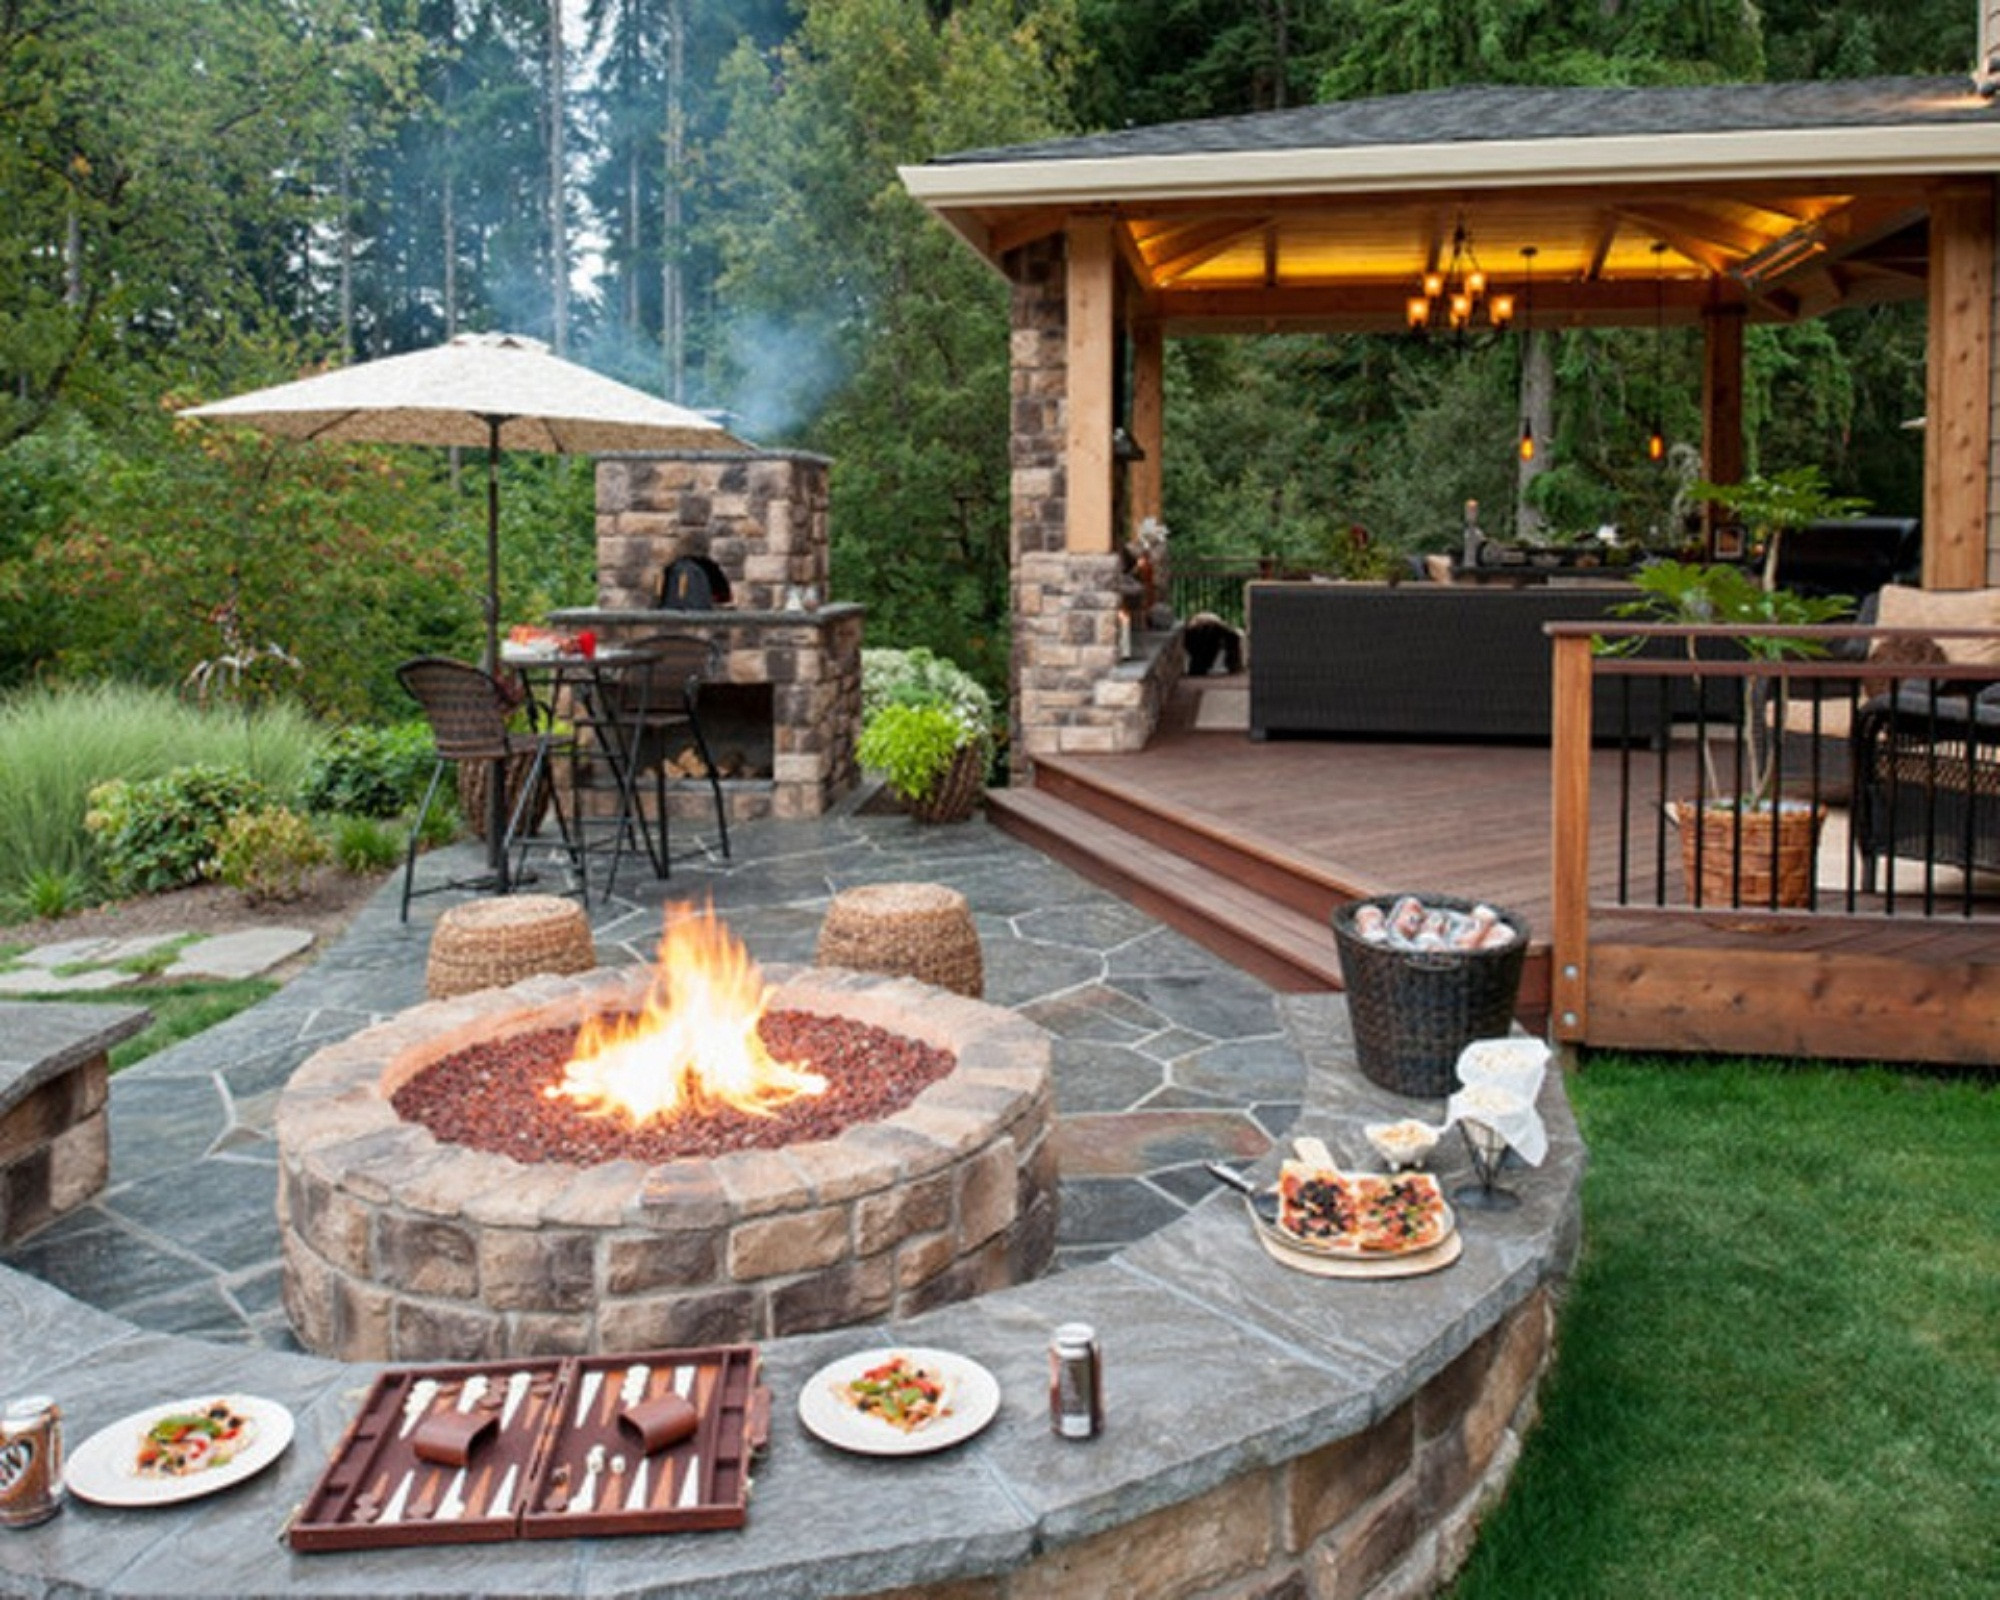 Outdoor Kitchen And Fireplace
 Upgrade Your Backyard with an Outdoor Kitchen